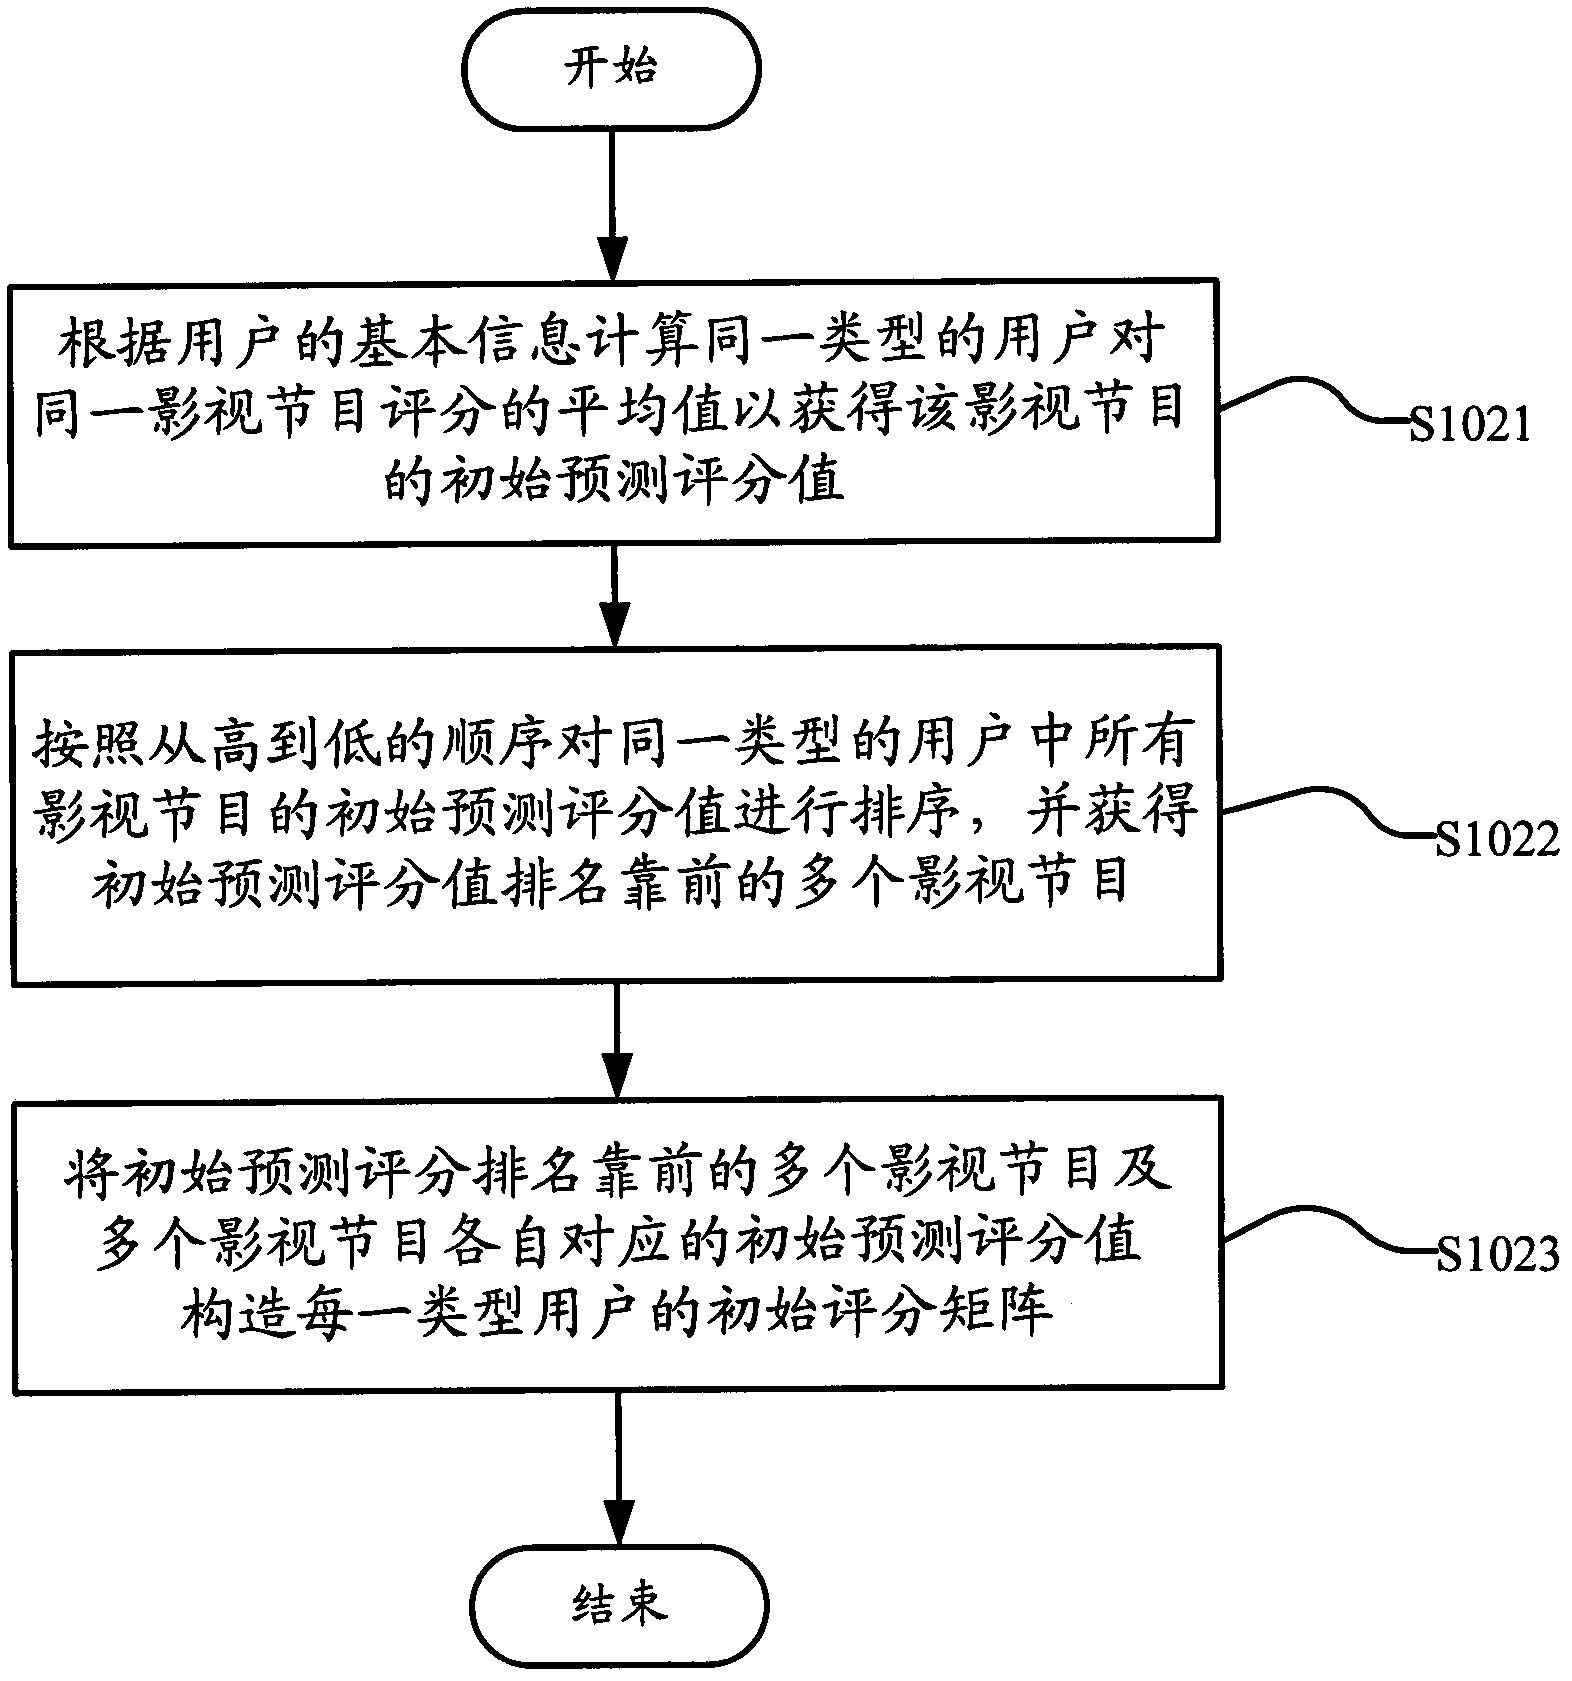 Television program recommending method and device for digital television